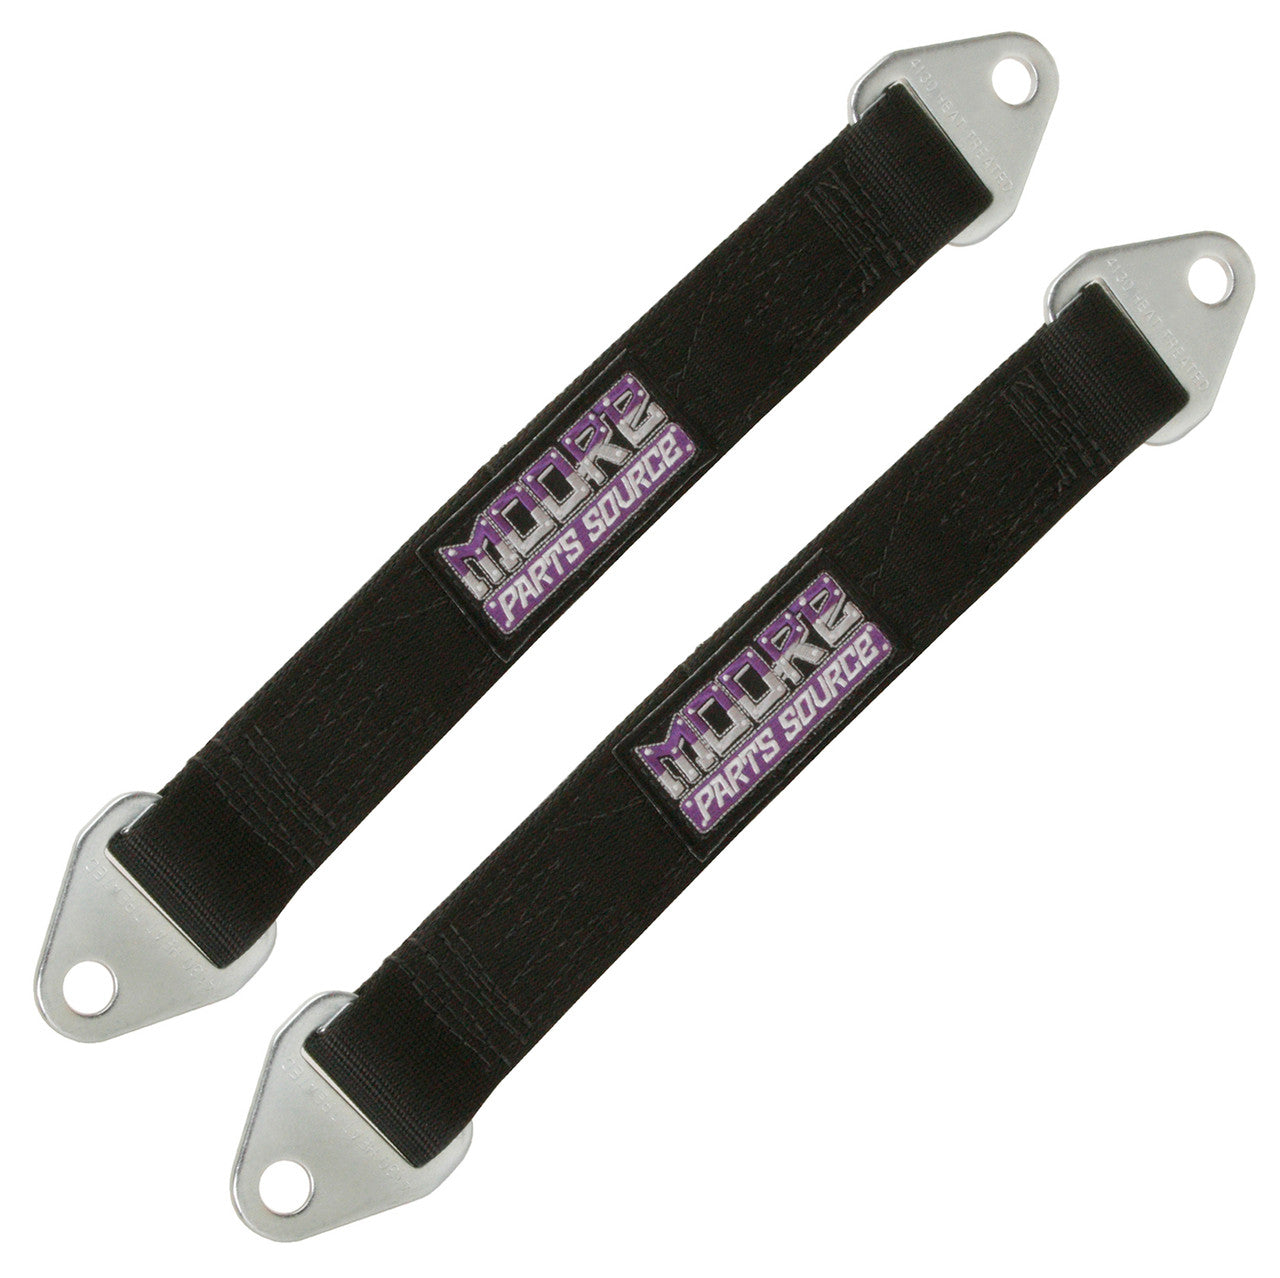 23 Inch USA Made Off-Road Suspension Limit Straps, Sold As Pair